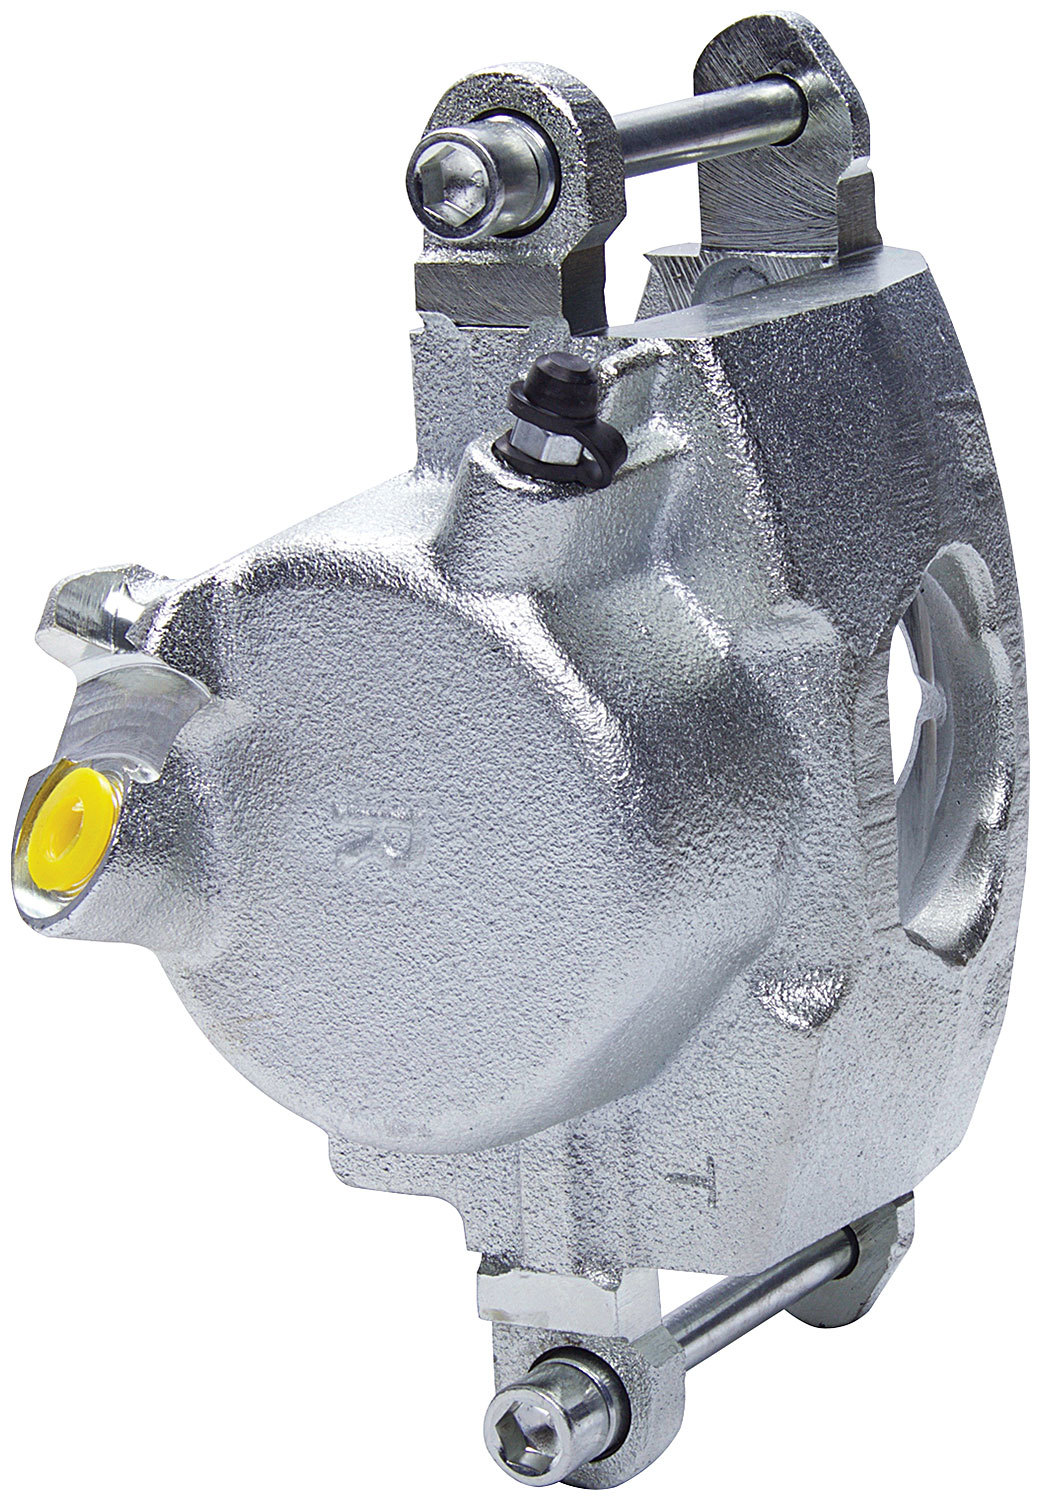 Allstar Performance 42081 Brake Caliper, Passenger Side, Large GM, 1 Piston, Cast Iron, Natural, 2.813 in Bore, 1.000 in Thick Rotor Maximum, 7.060 Floating Mount, Each